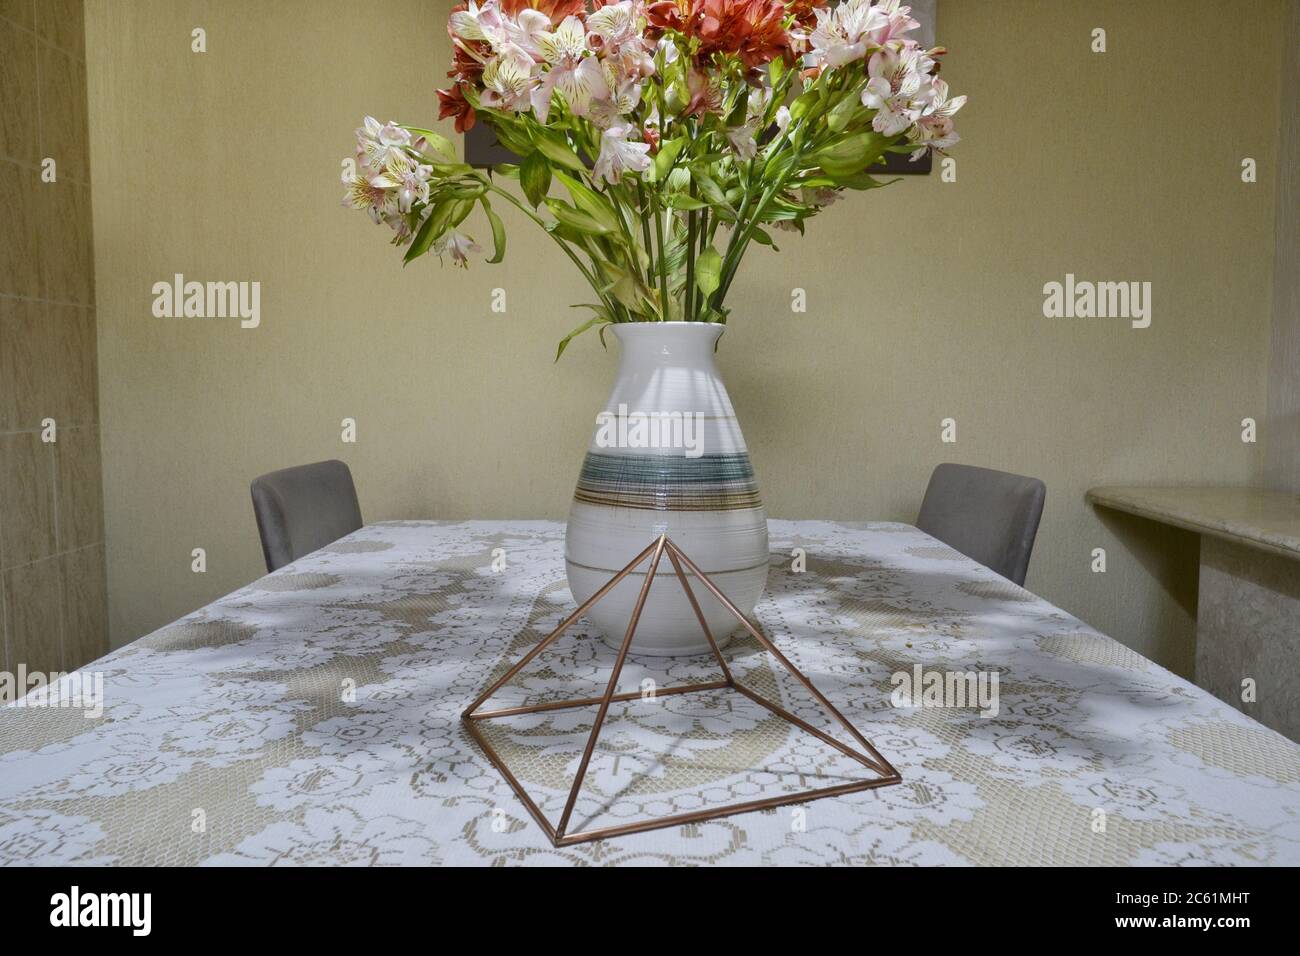 Copper pyramid, with Astromelia vase, Alstroemeria Hybrida on a travertine marble table base with white lace tablecloth, with chairs and white wall in Stock Photo